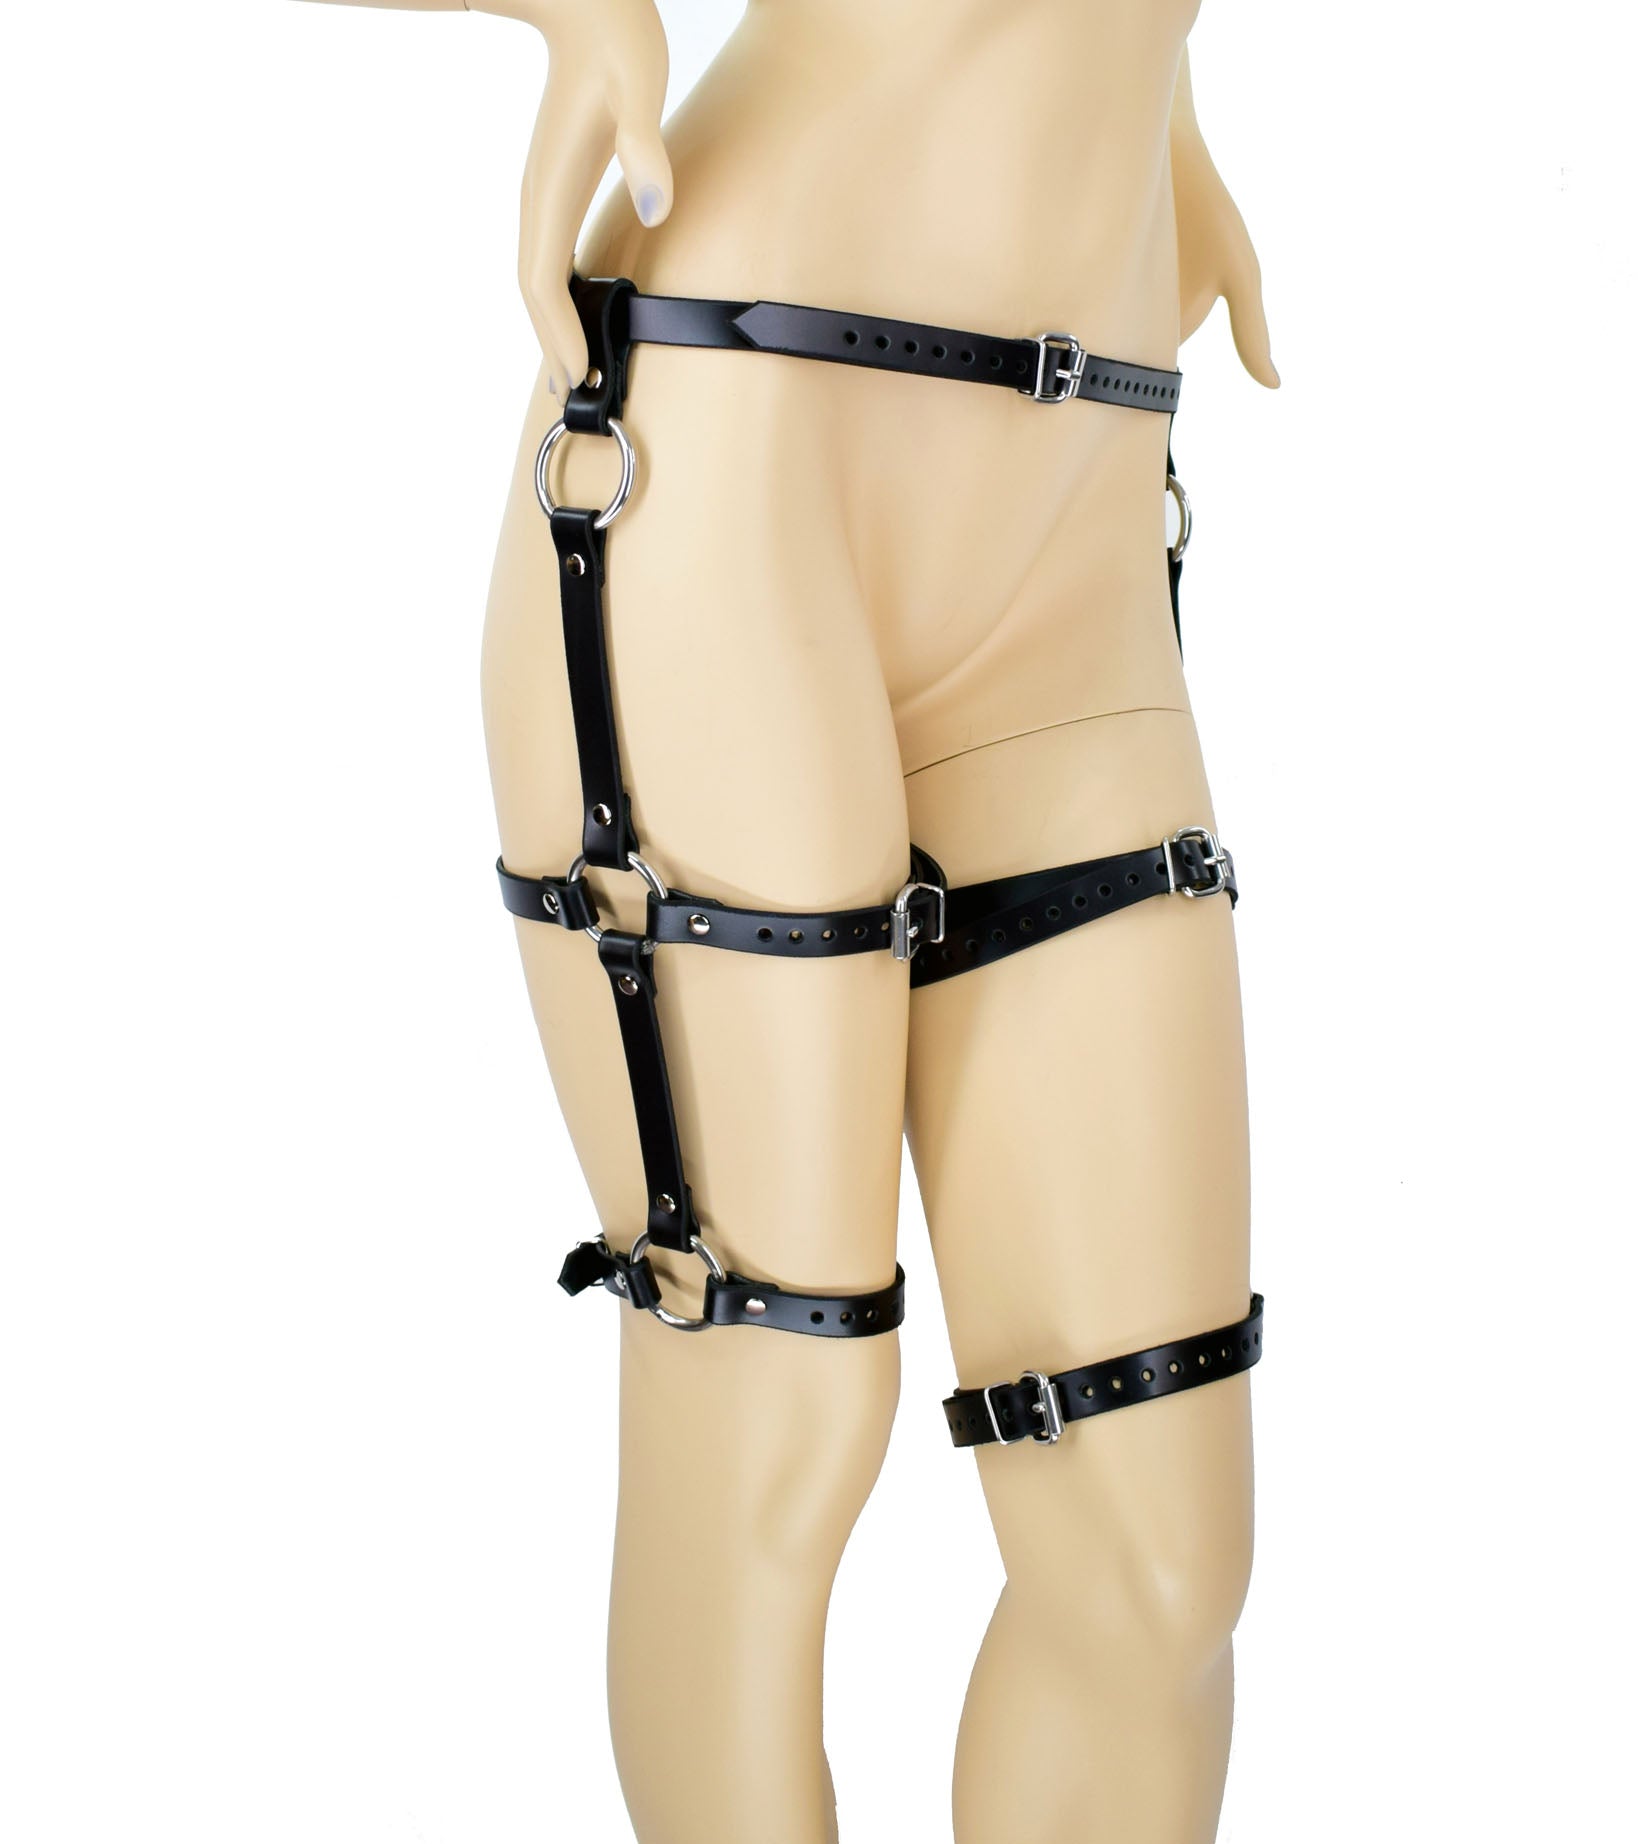 The Leather Garter Double Leg Harness on a mannequin, side view.